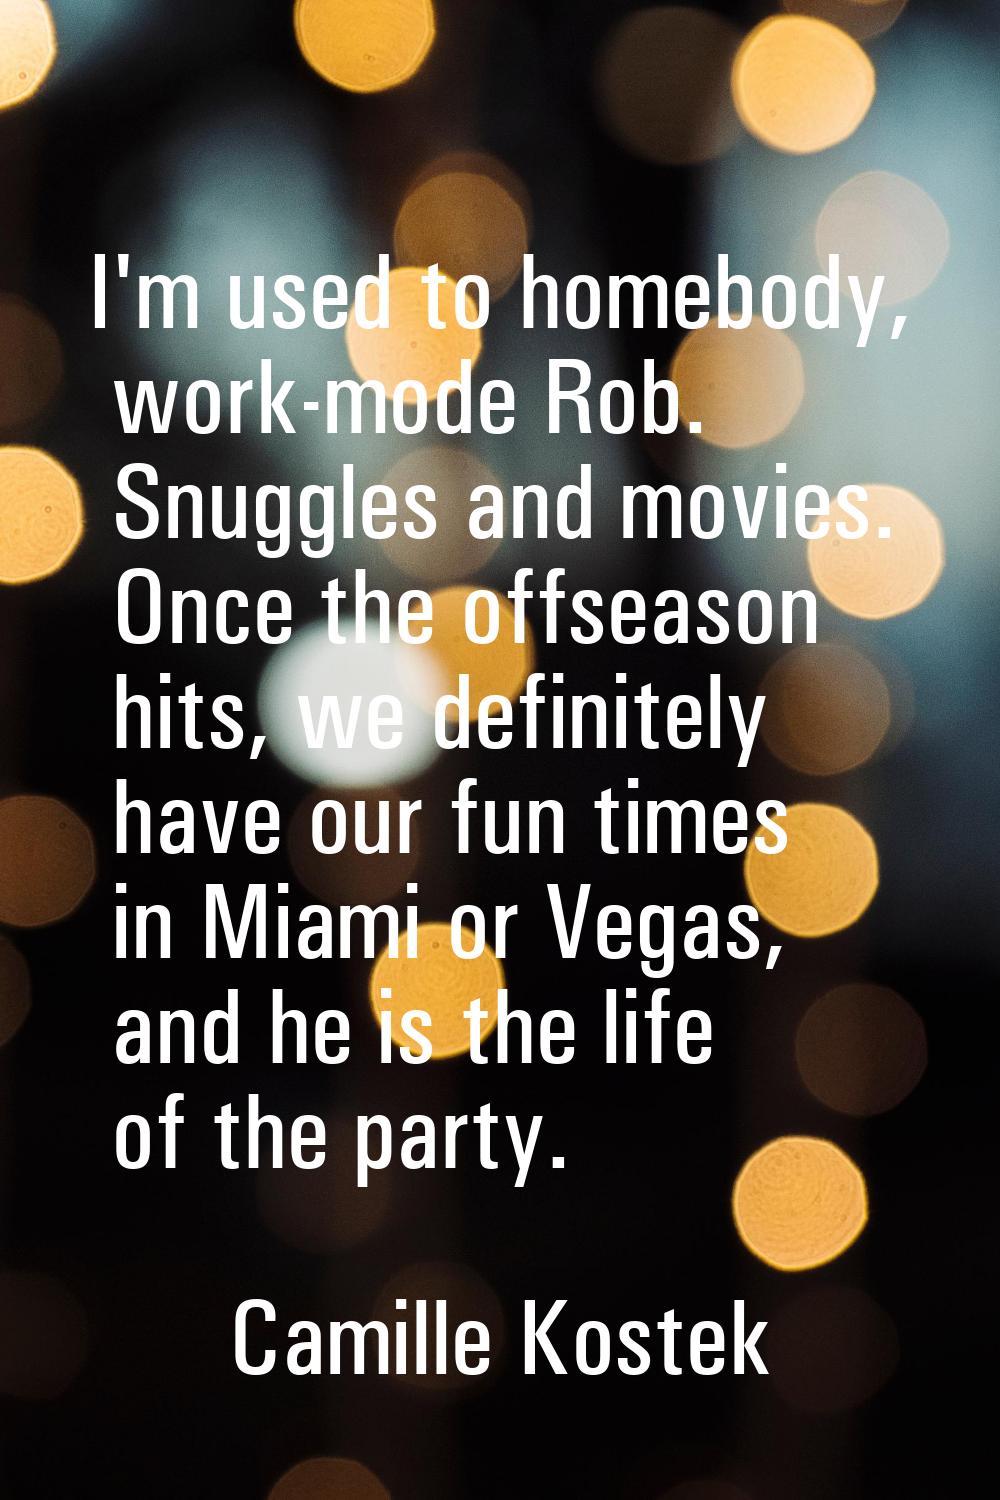 I'm used to homebody, work-mode Rob. Snuggles and movies. Once the offseason hits, we definitely ha